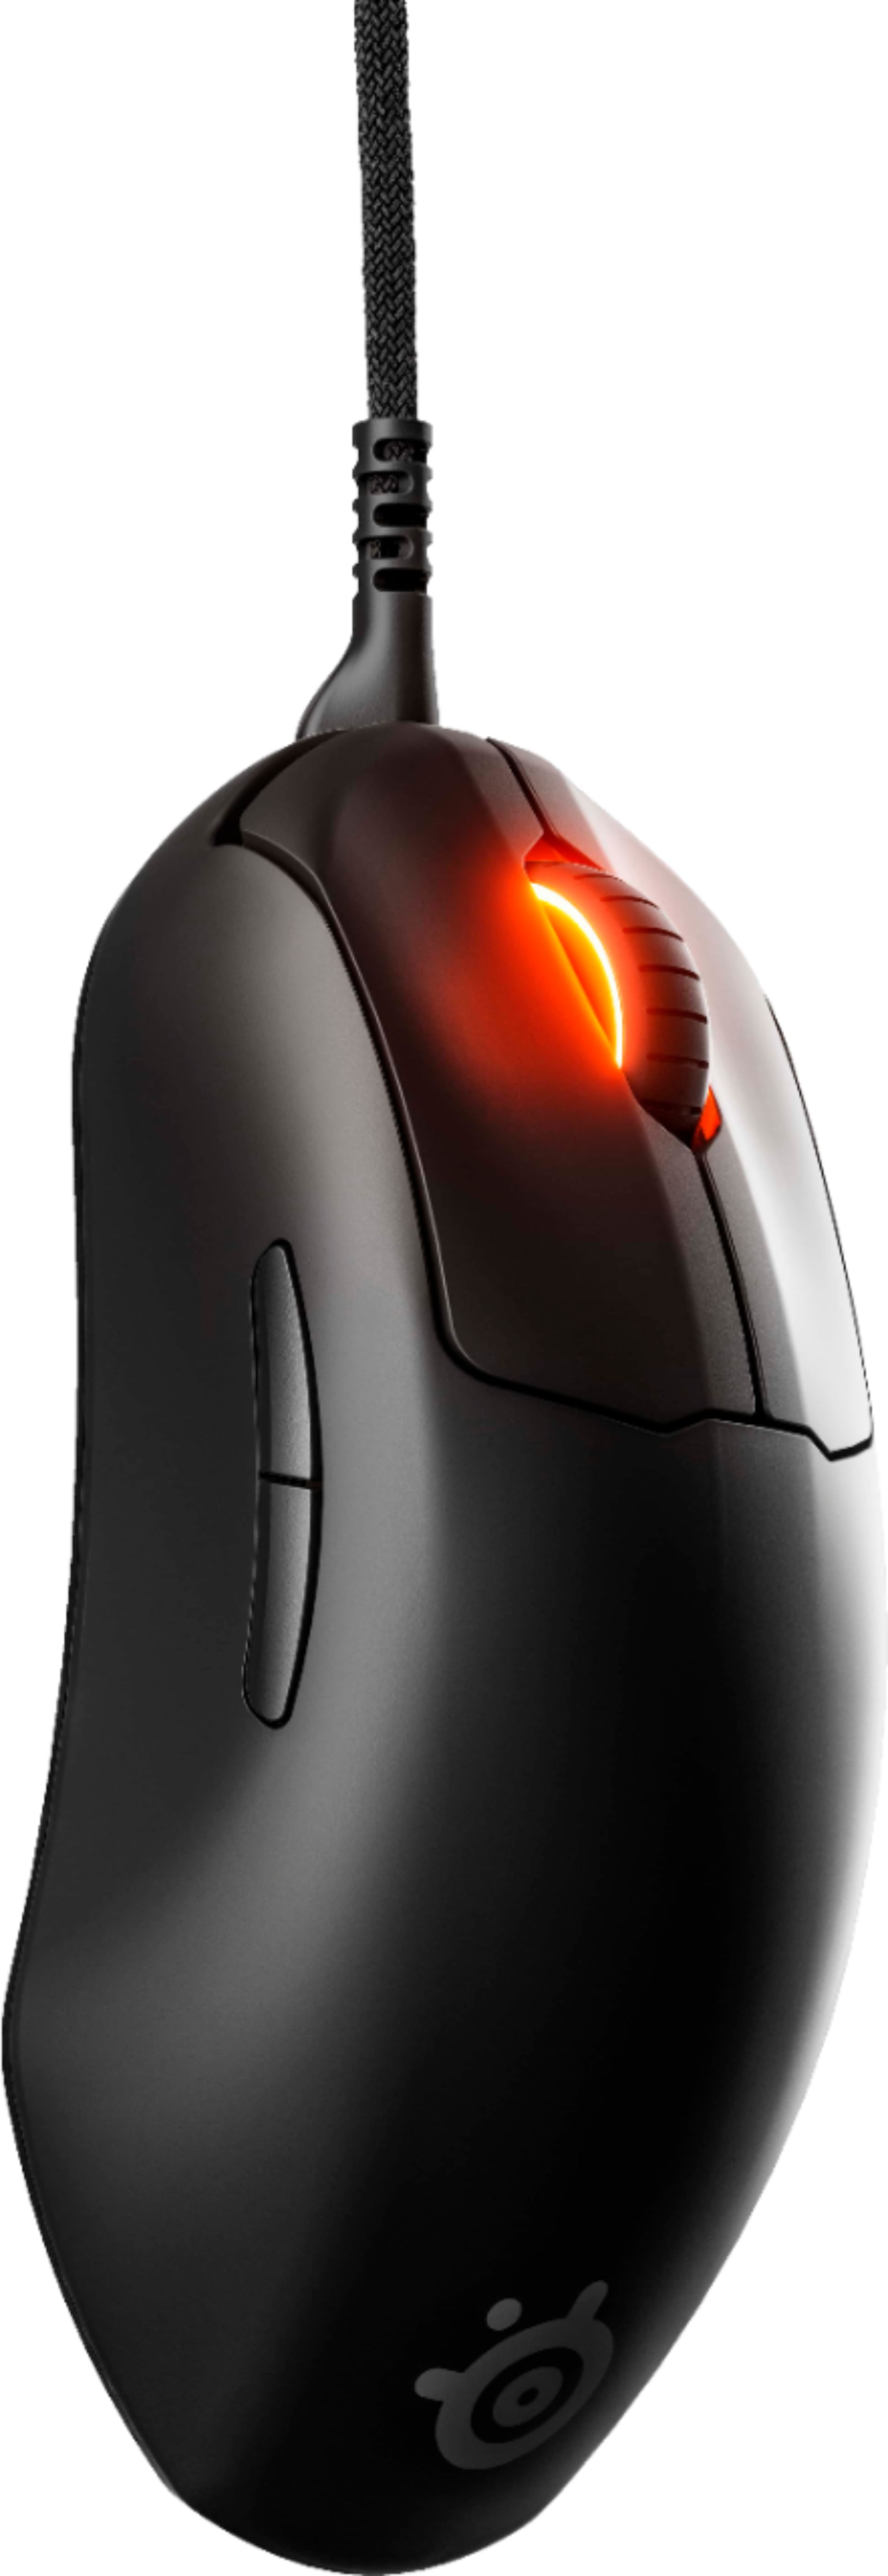 Angle View: SteelSeries - Prime Lightweight Wireless Optical Gaming Mouse with RGB Lighting - Black